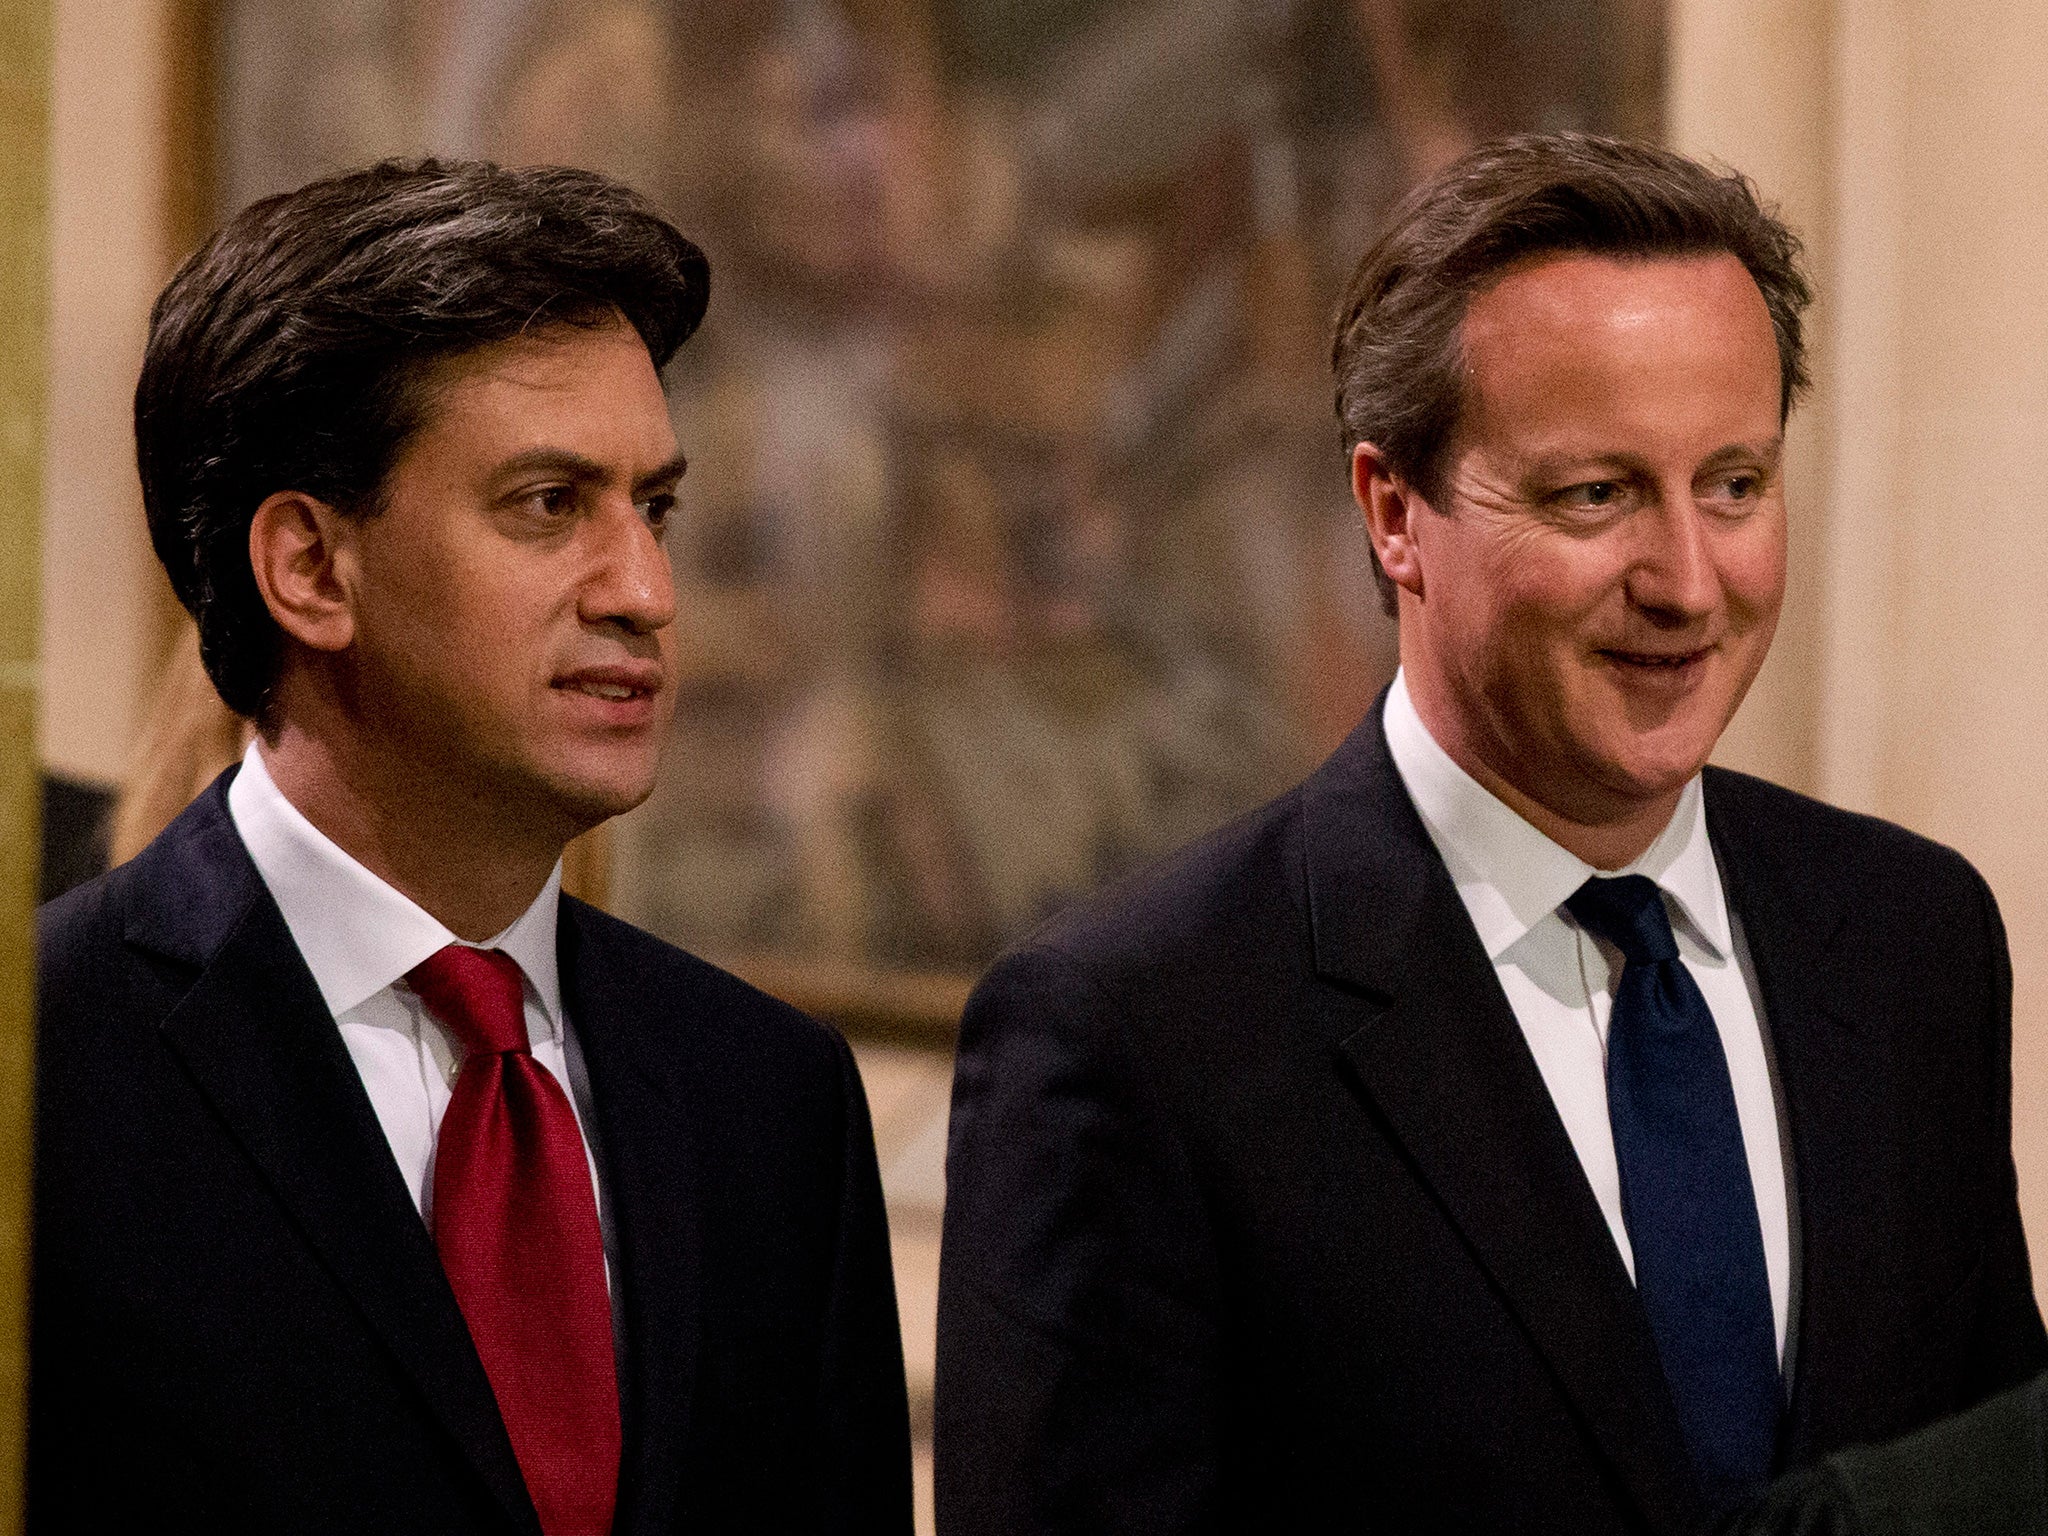 Labour or the Conservatives - who will get your vote?